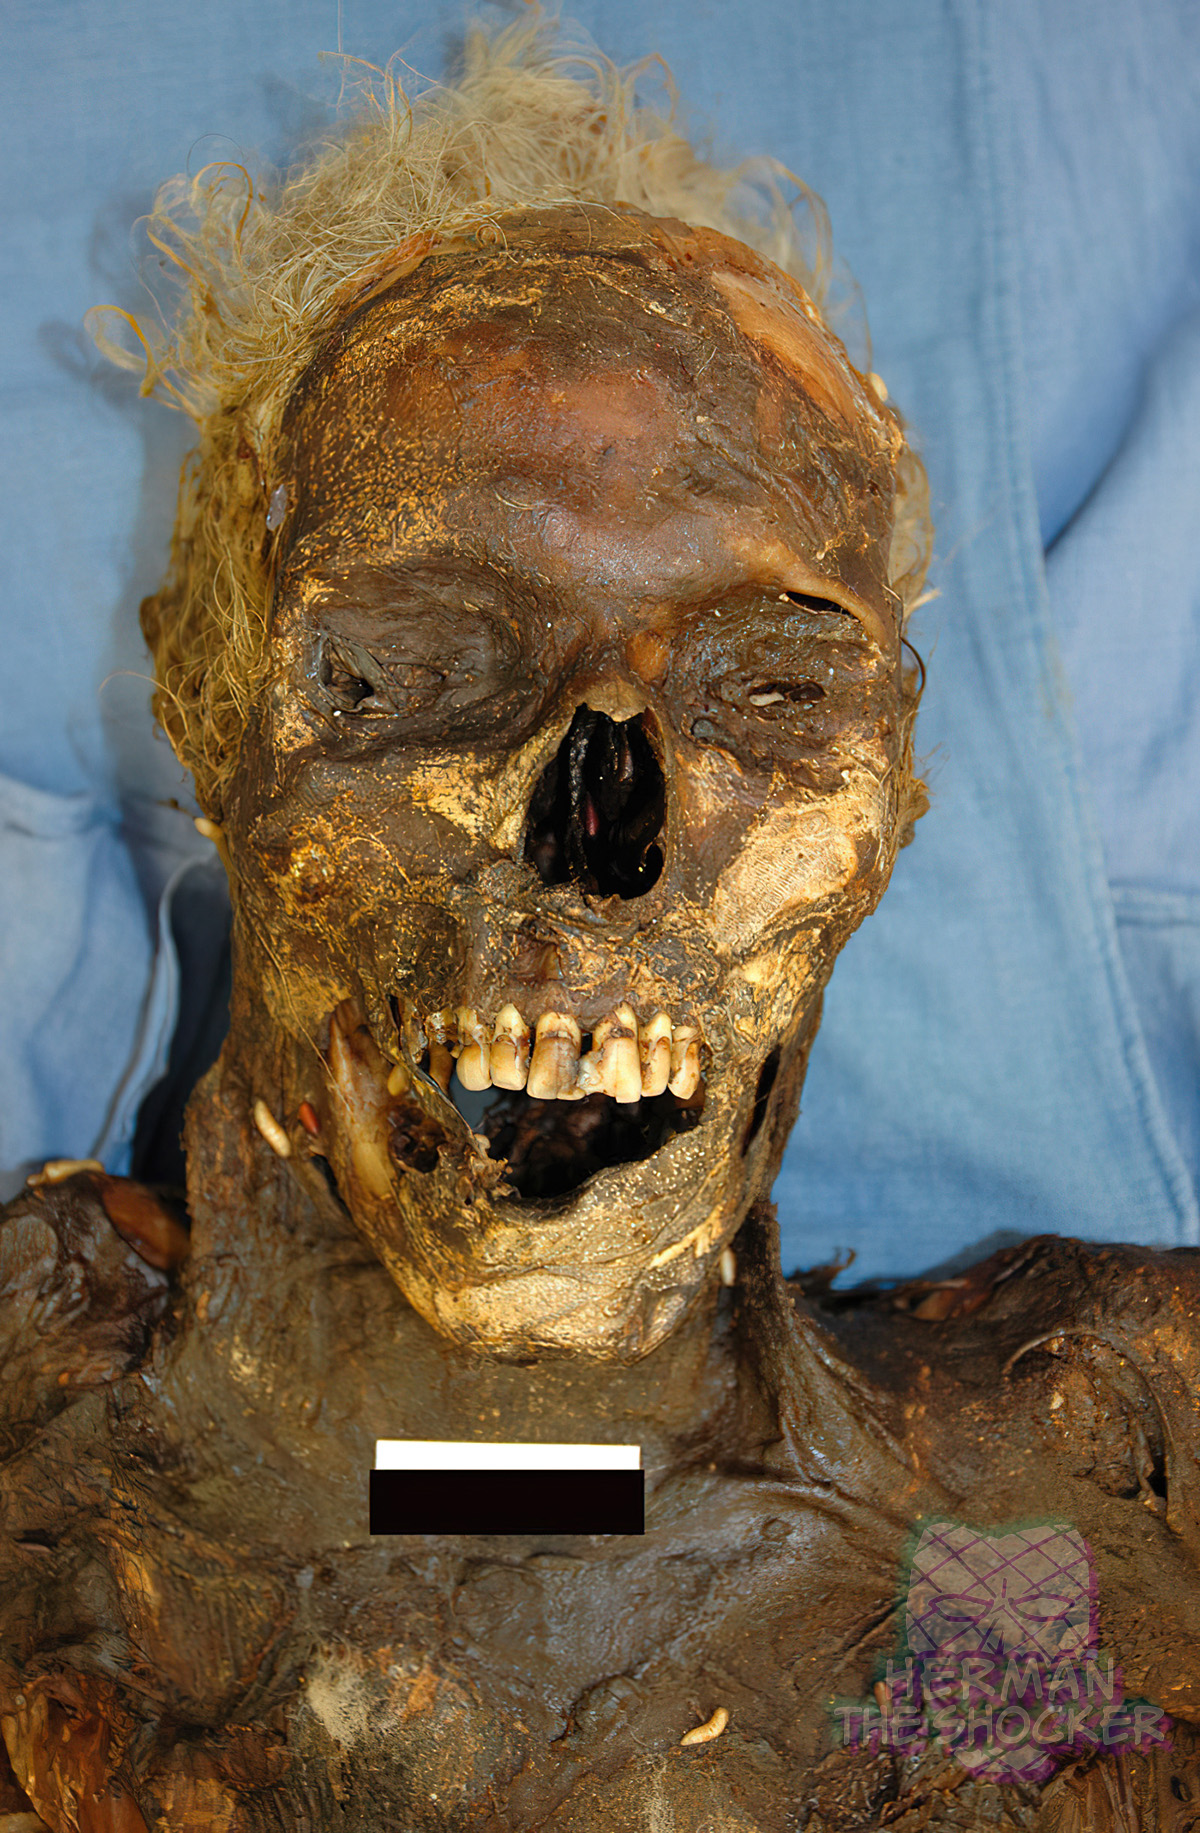 Mummification can result in very hard, leathery skin